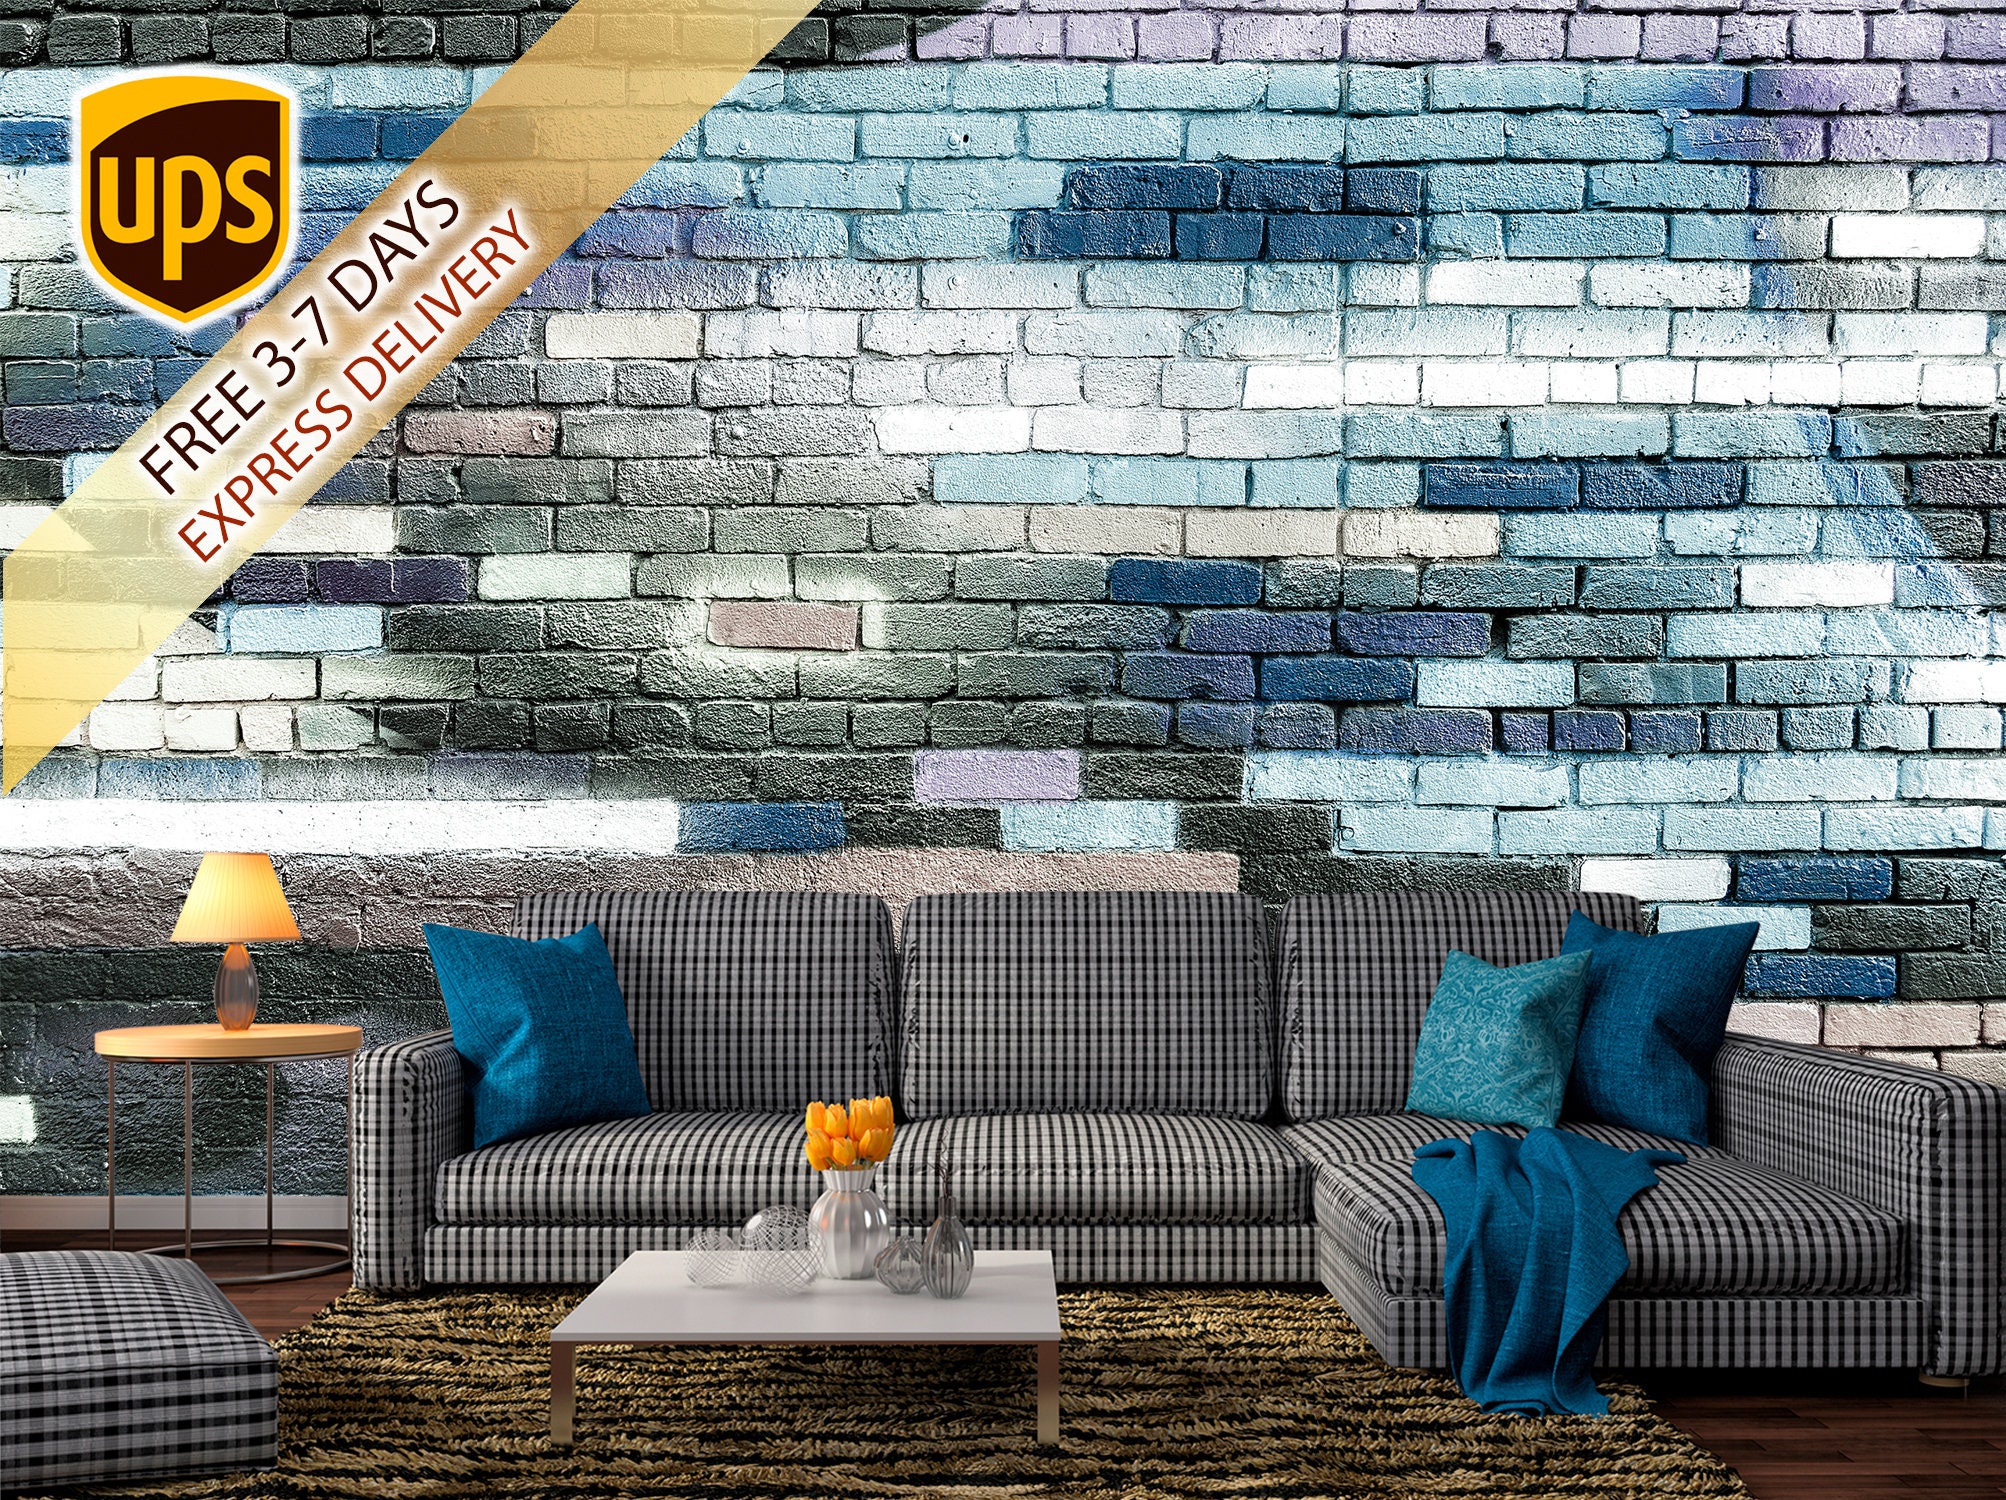 Collapsed and Repaired Brick Wall – high-quality wall murals with